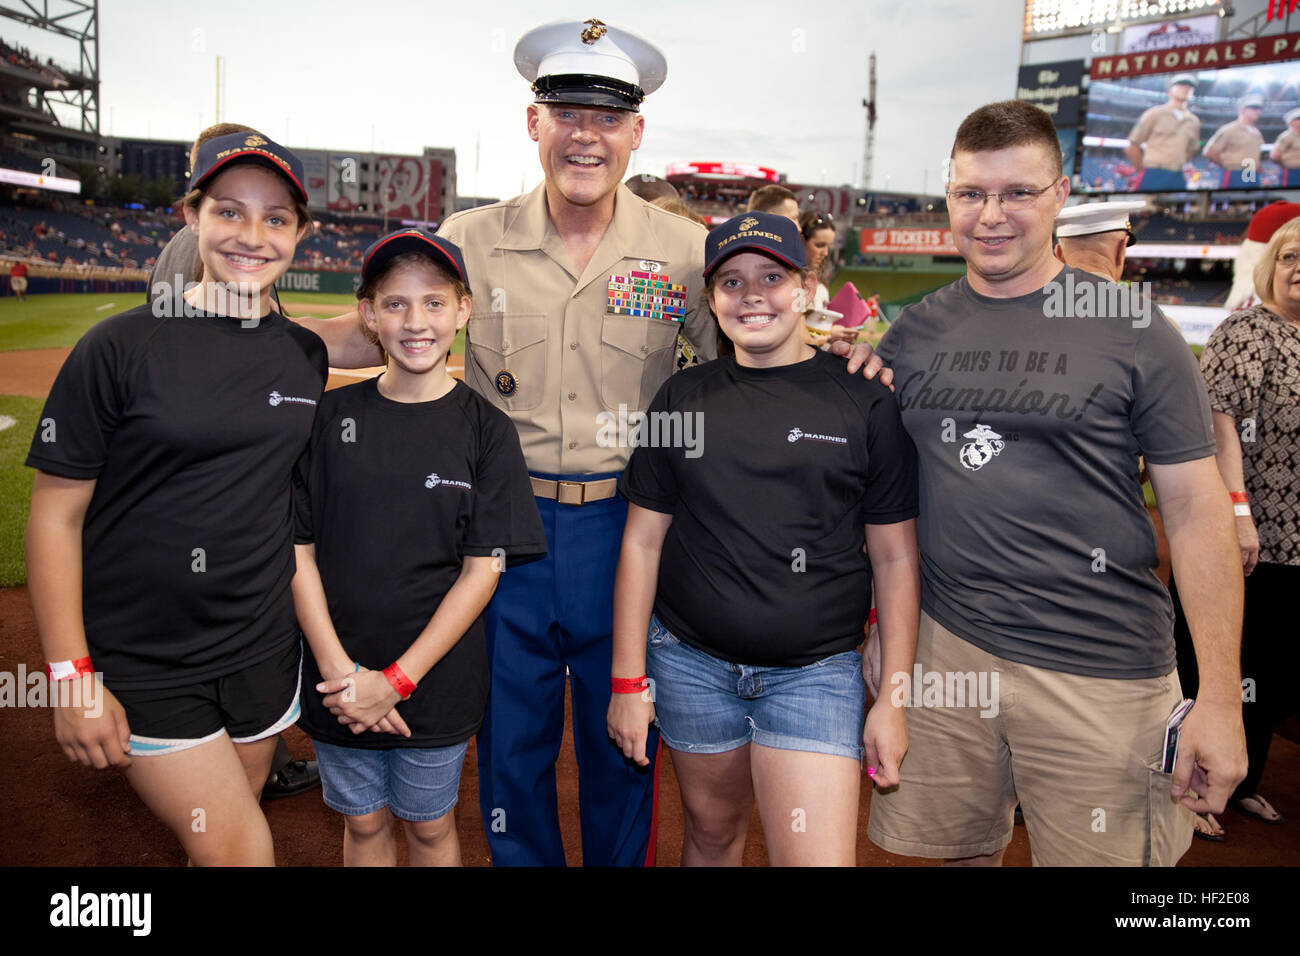 The 17th Sergeant Major of the Marine Corps, Sgt. Maj. Micheal P. Barrett, center, poses for a photo while attending the Washington Nationals' Marines Day baseball game in Washington, D.C., Aug. 20, 2014. (U.S. Marine Corps photo by Lance Cpl. Samantha K. Draughon/Released) Sergeant Major of the Marine Corps Attends Baseball Game 140820-M-EL431-028 Stock Photo